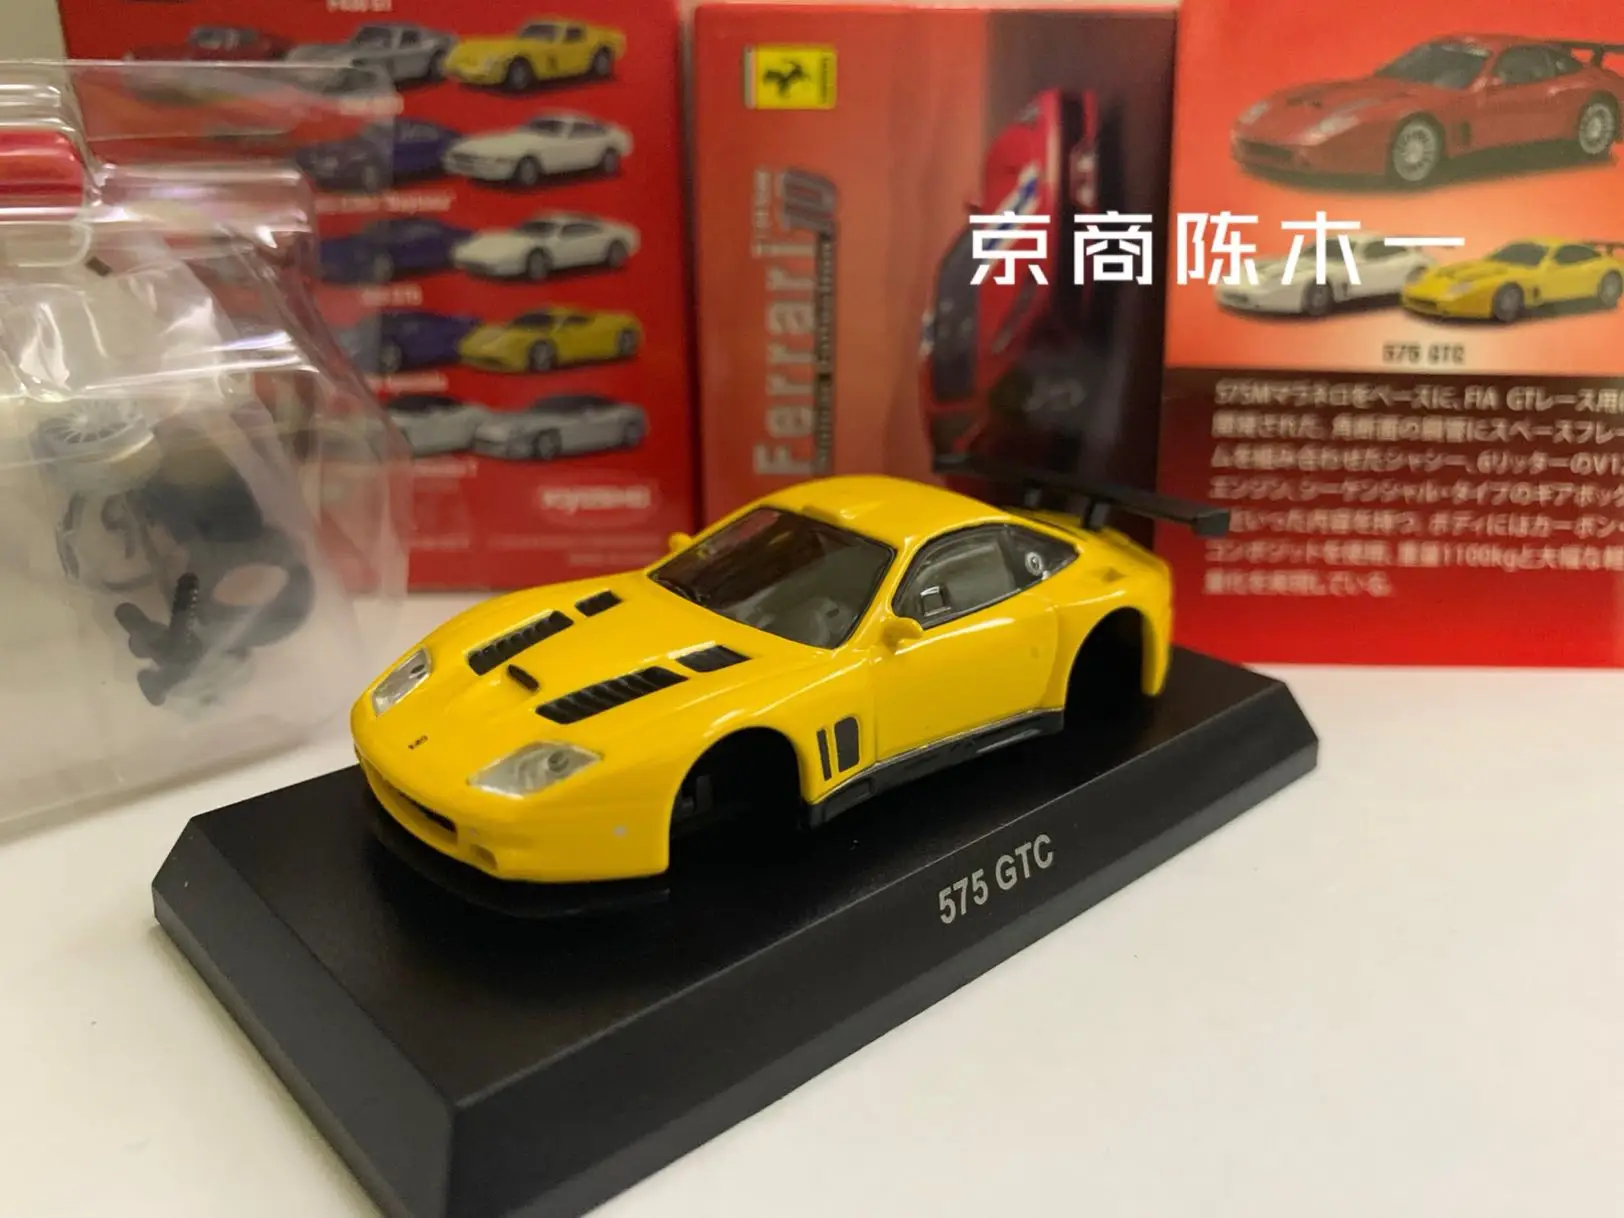 

1/64 KYOSHO Ferrari 575 GTC LM F1 RACING Collection of die-cast alloy assembled car decoration model toys